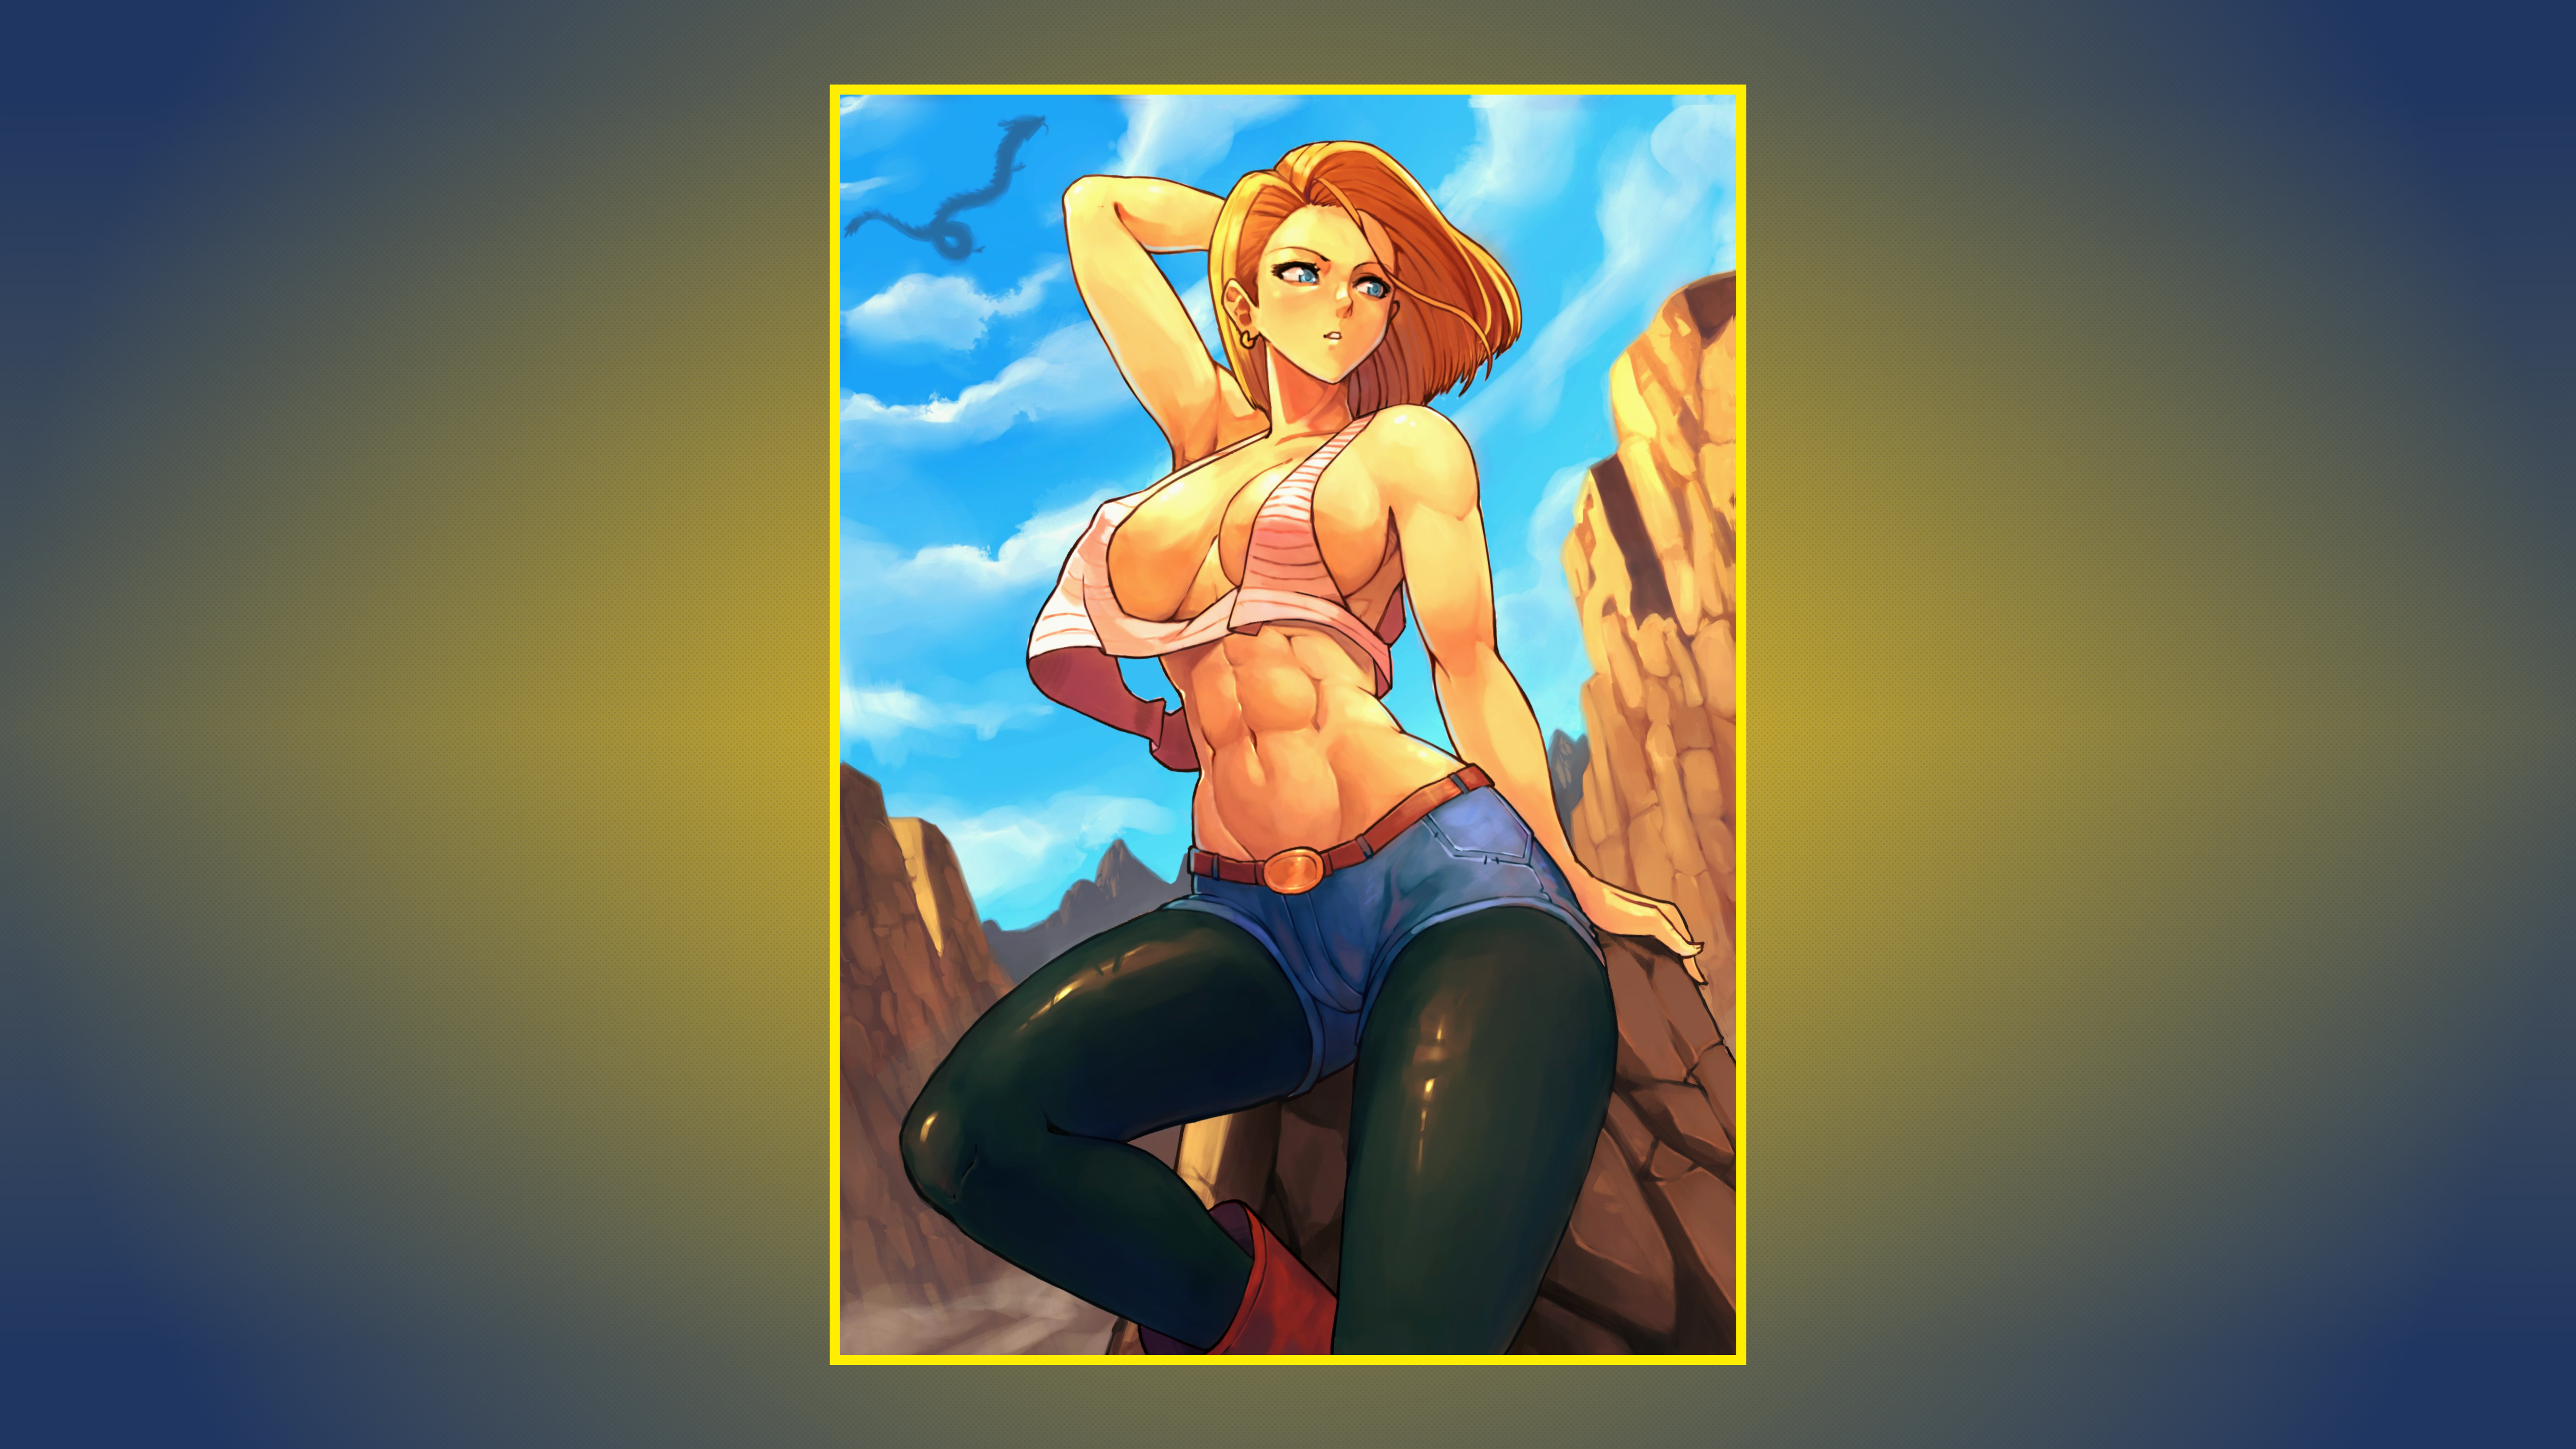 Anime 5120x2880 Dragon Ball Dragon Ball Z Android 18 leggings jean shorts short shorts belt bare midriff belly belly button short hair blonde blue eyes big boobs underboob cleavage nipples through clothing covered nipples nipples armpits earring arm(s) behind head sitting rocks sky clouds dragon Shenron Chinese dragon muscular brown boots spread armpit halter top bare shoulders black pantyhose pantyhose hard nipples crop top no bra 6-pack thighs tank top boobs babusgames bright